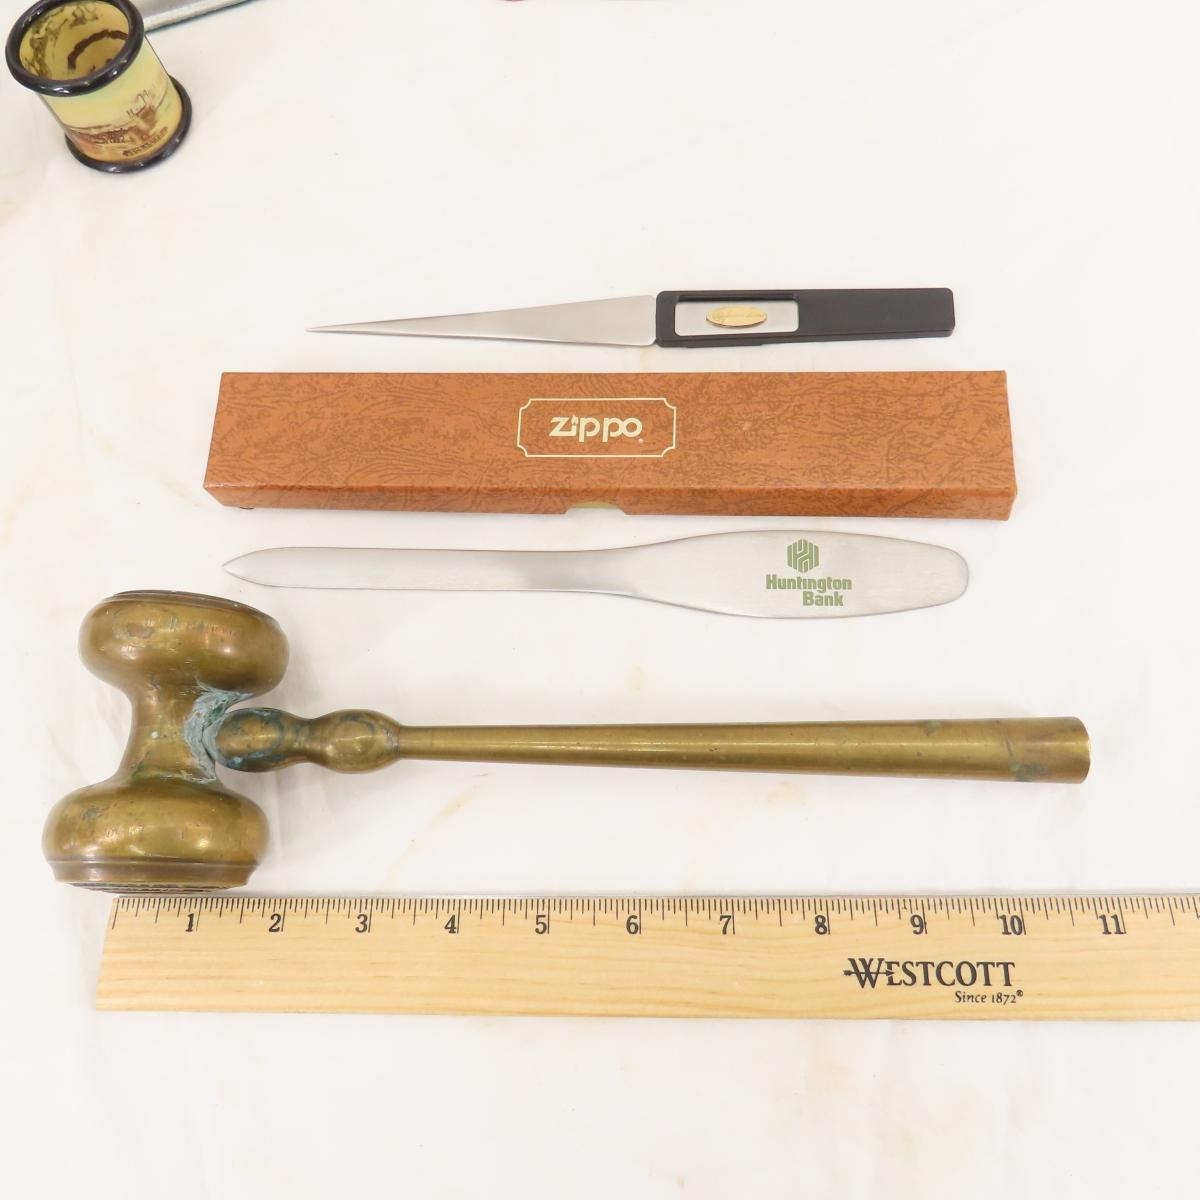 Brass Gavel, Bookends, Shoe Sample & More